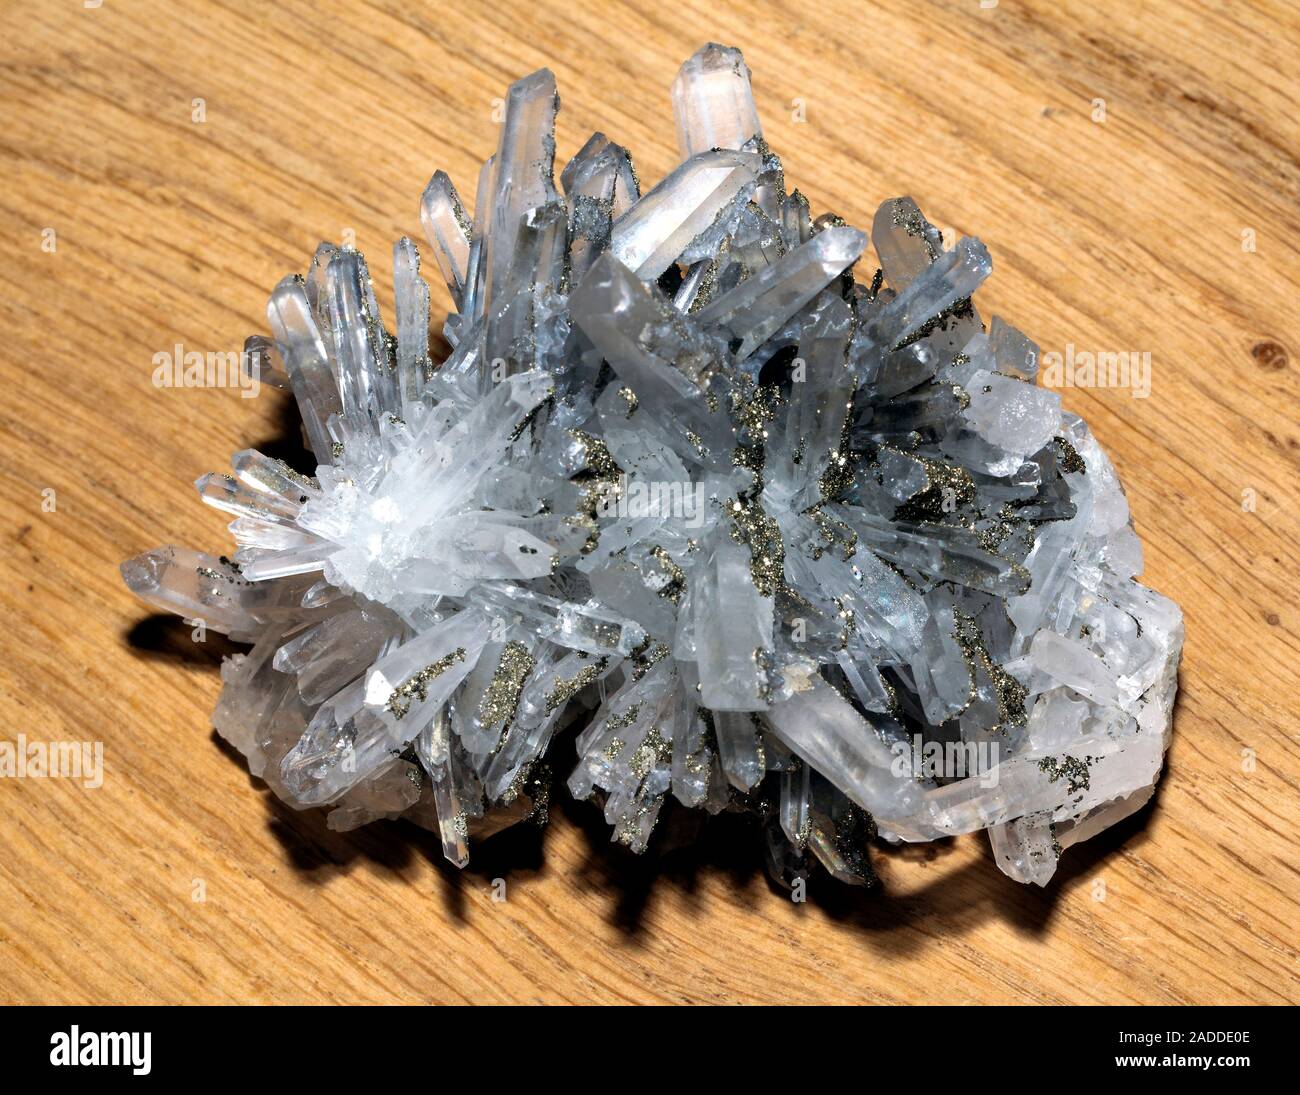 Sample of clear crystalline quartz, the substrate interspersed with small  crystals of pyrite that have a characteristic golden metallic lustre. The  qu Stock Photo - Alamy